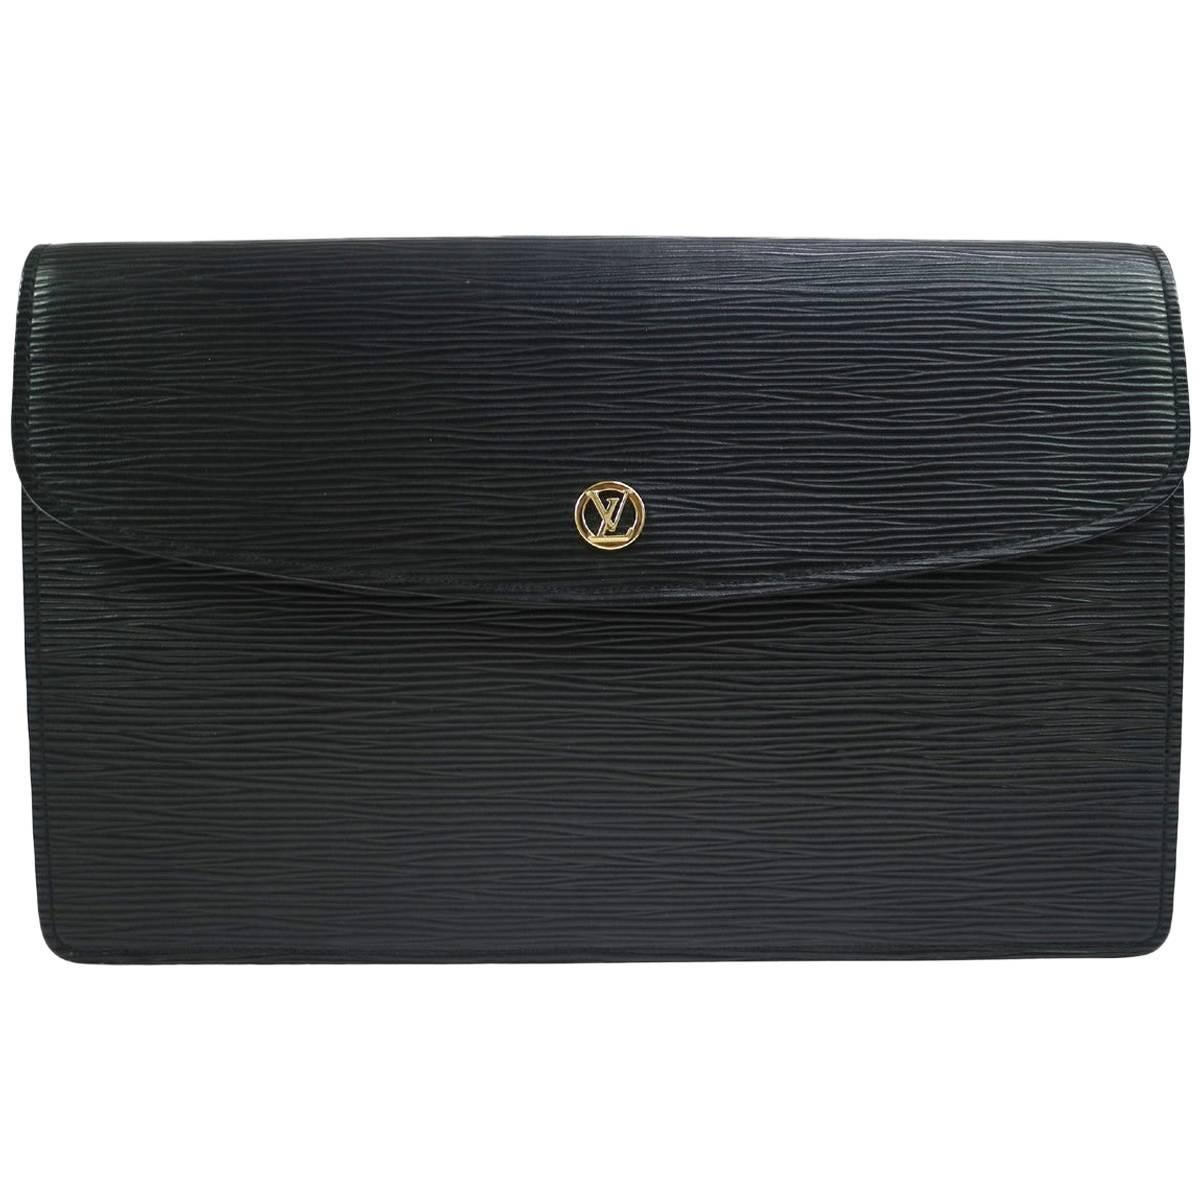 Louis Vuitton Black Leather Clutch WIth Gold Detail 2013 Whisty